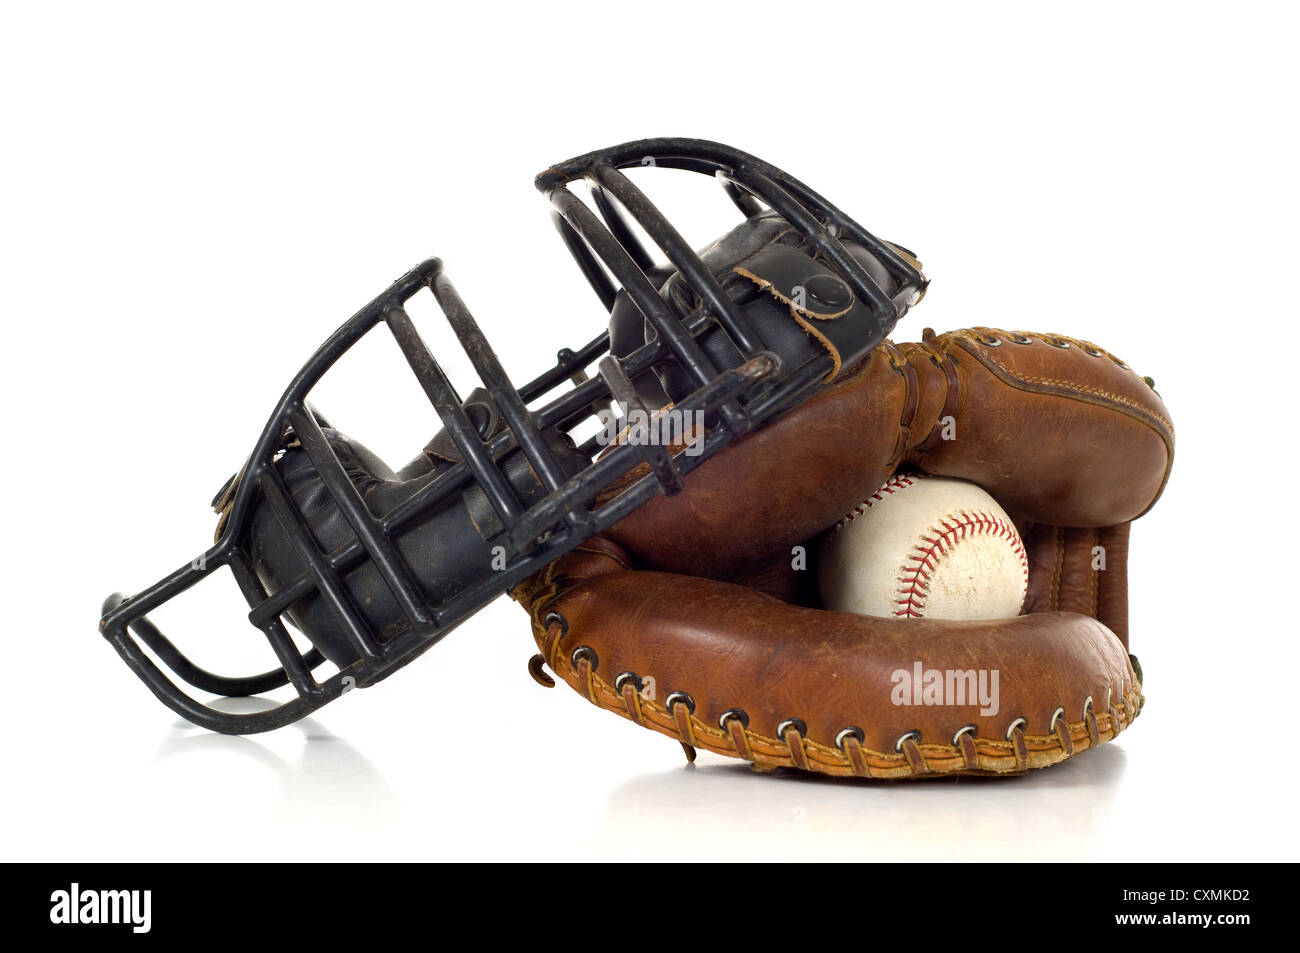 Baseball Catcher's gear on white background including a mitt, ball and face mask Stock Photo